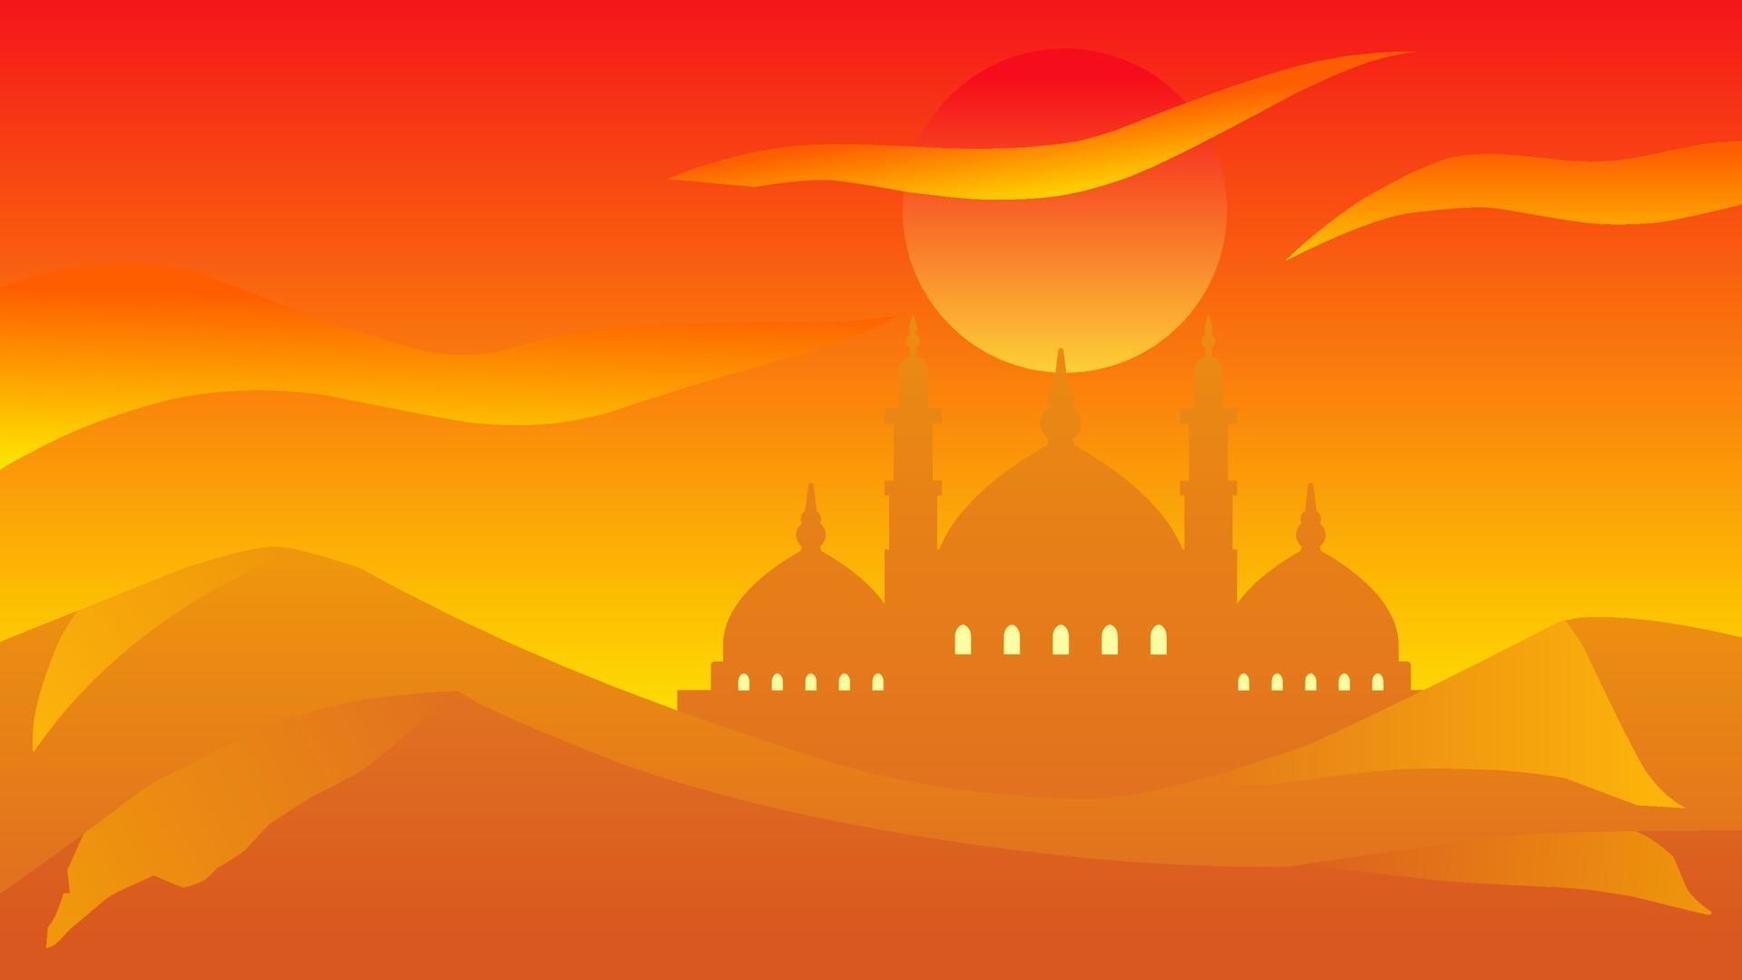 Background of silhouette mosque in the desert for islamic design. Landscape element for design graphic ramadan greeting in muslim culture and islam religion. Ramadan wallpaper of desert hill vector